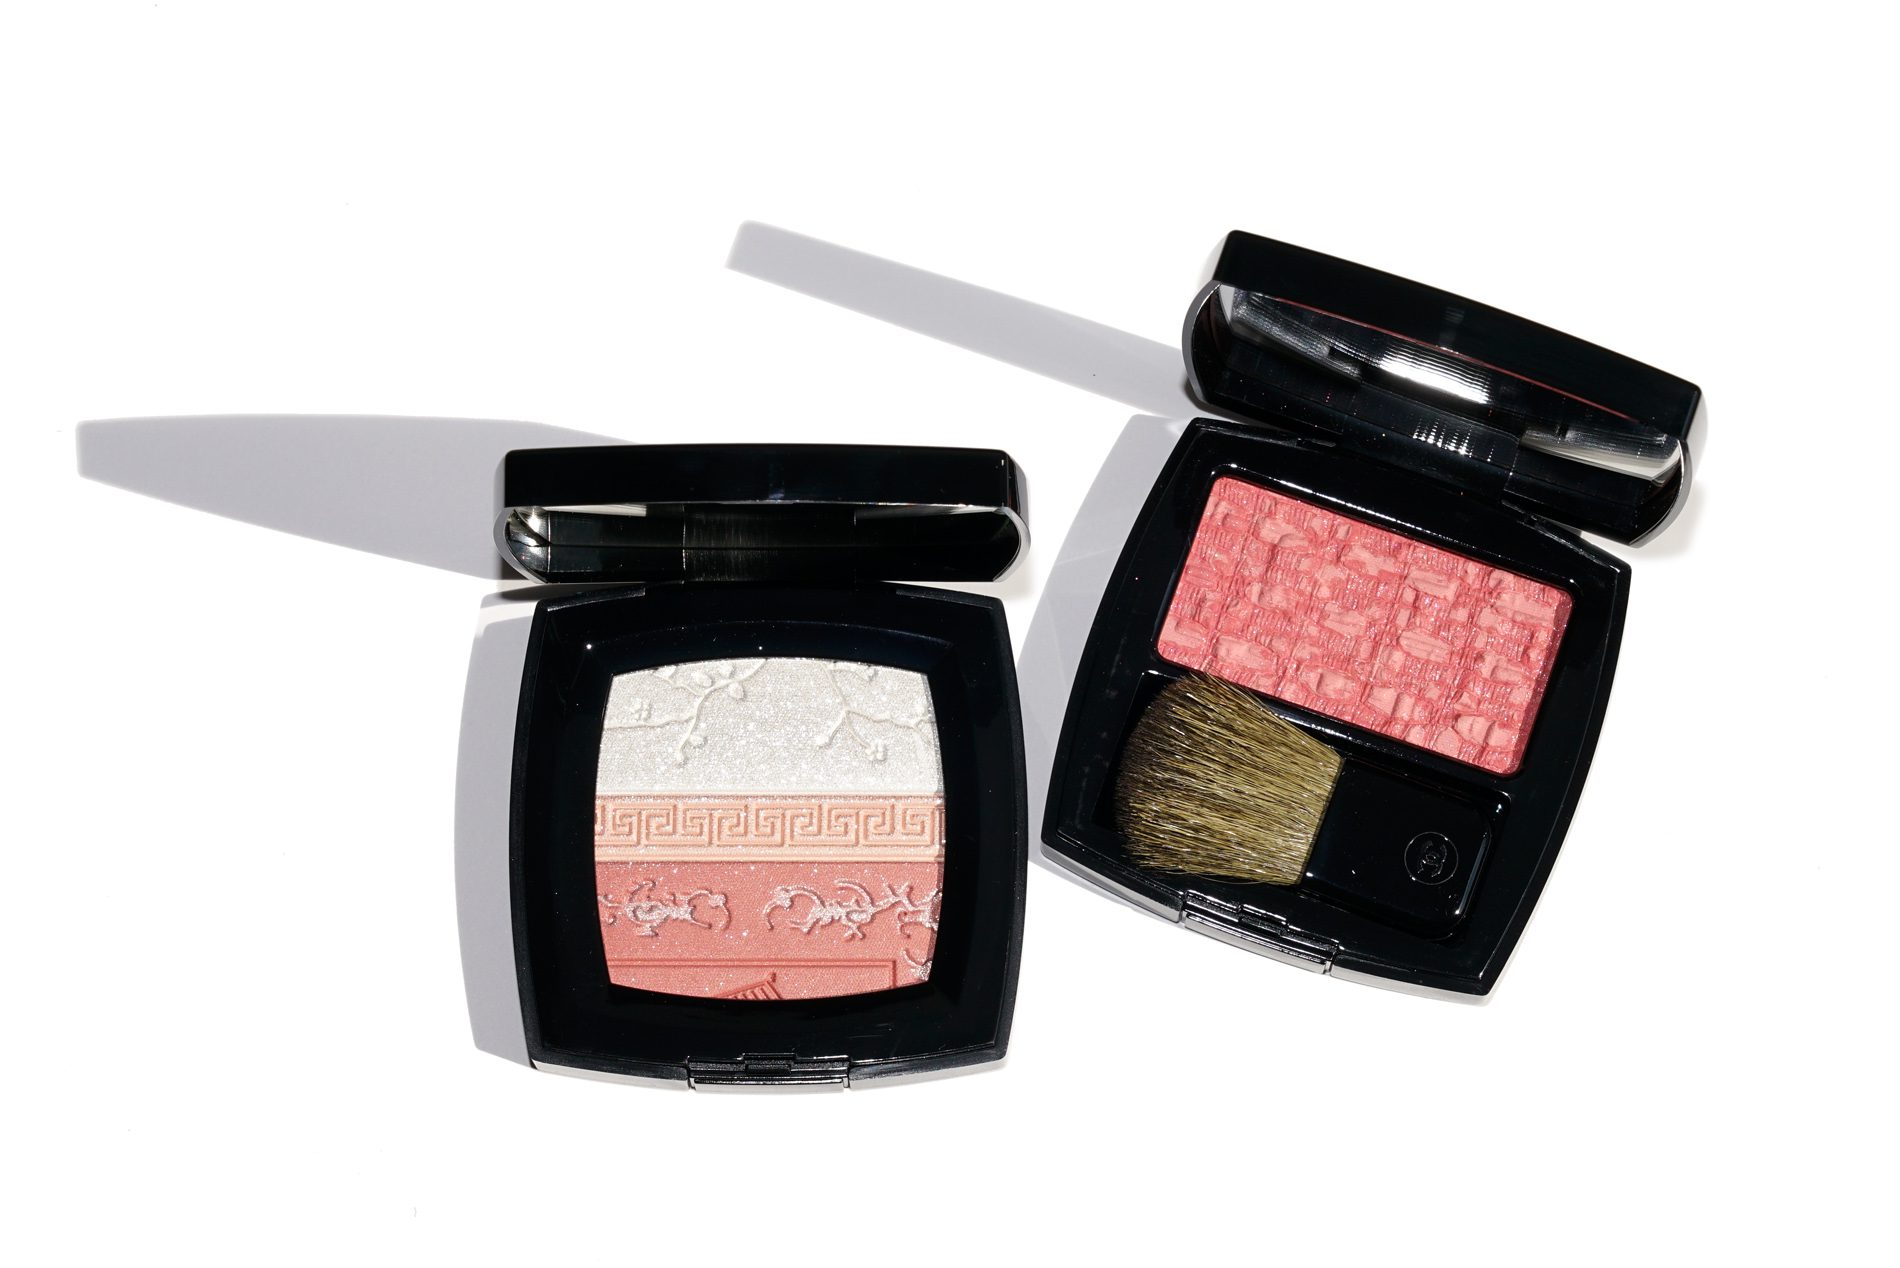 Chanel Dernieres Neiges de Chanel Collection - The Beauty Look Book